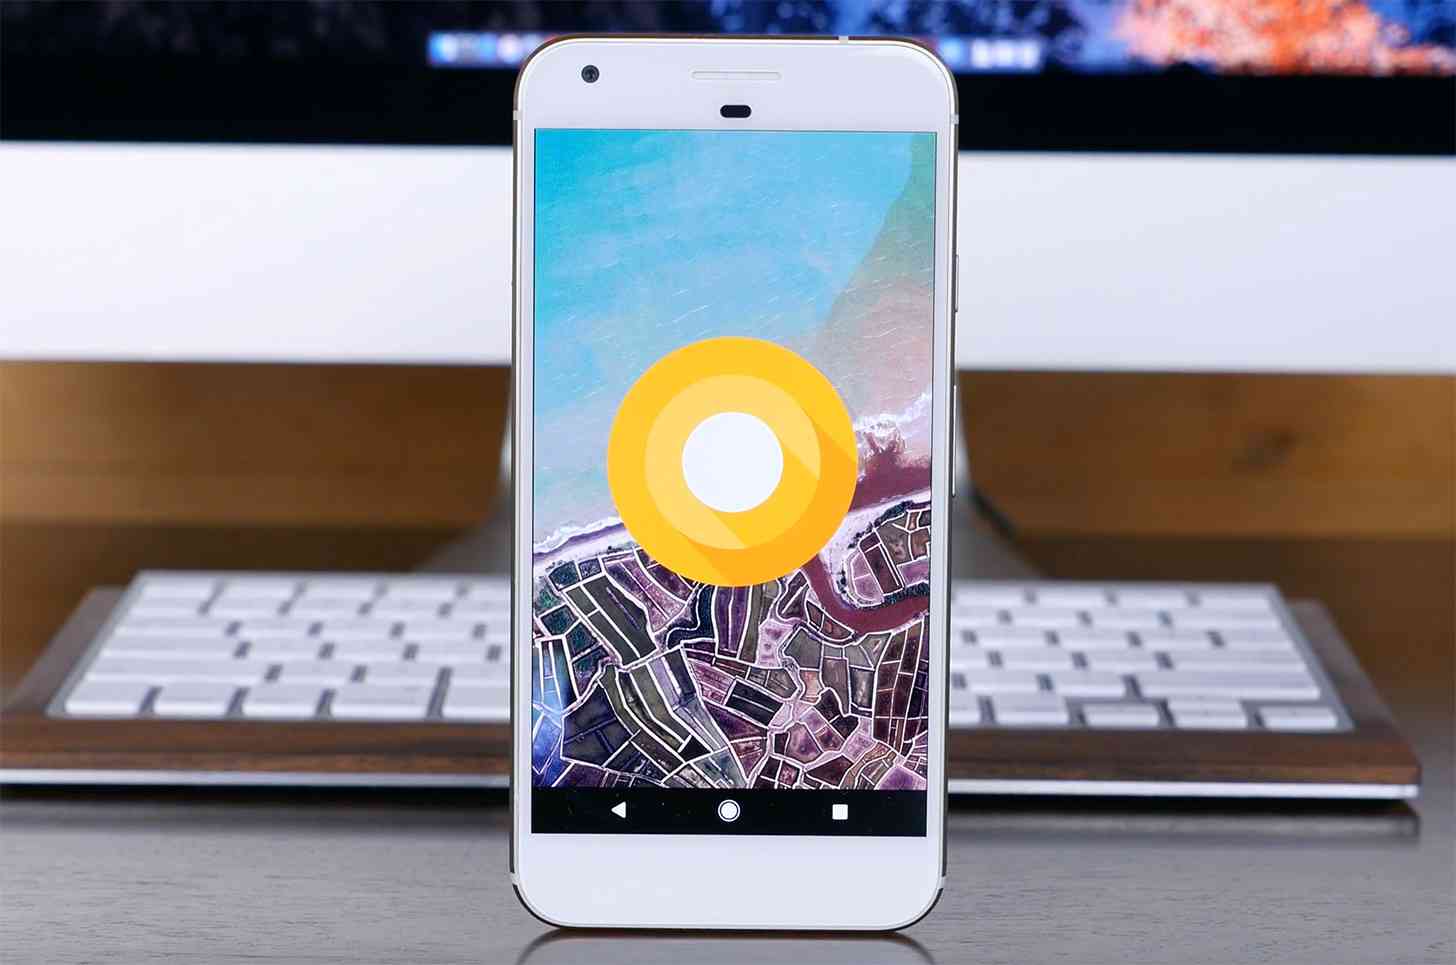 Android O hands-on Google Pixel XL